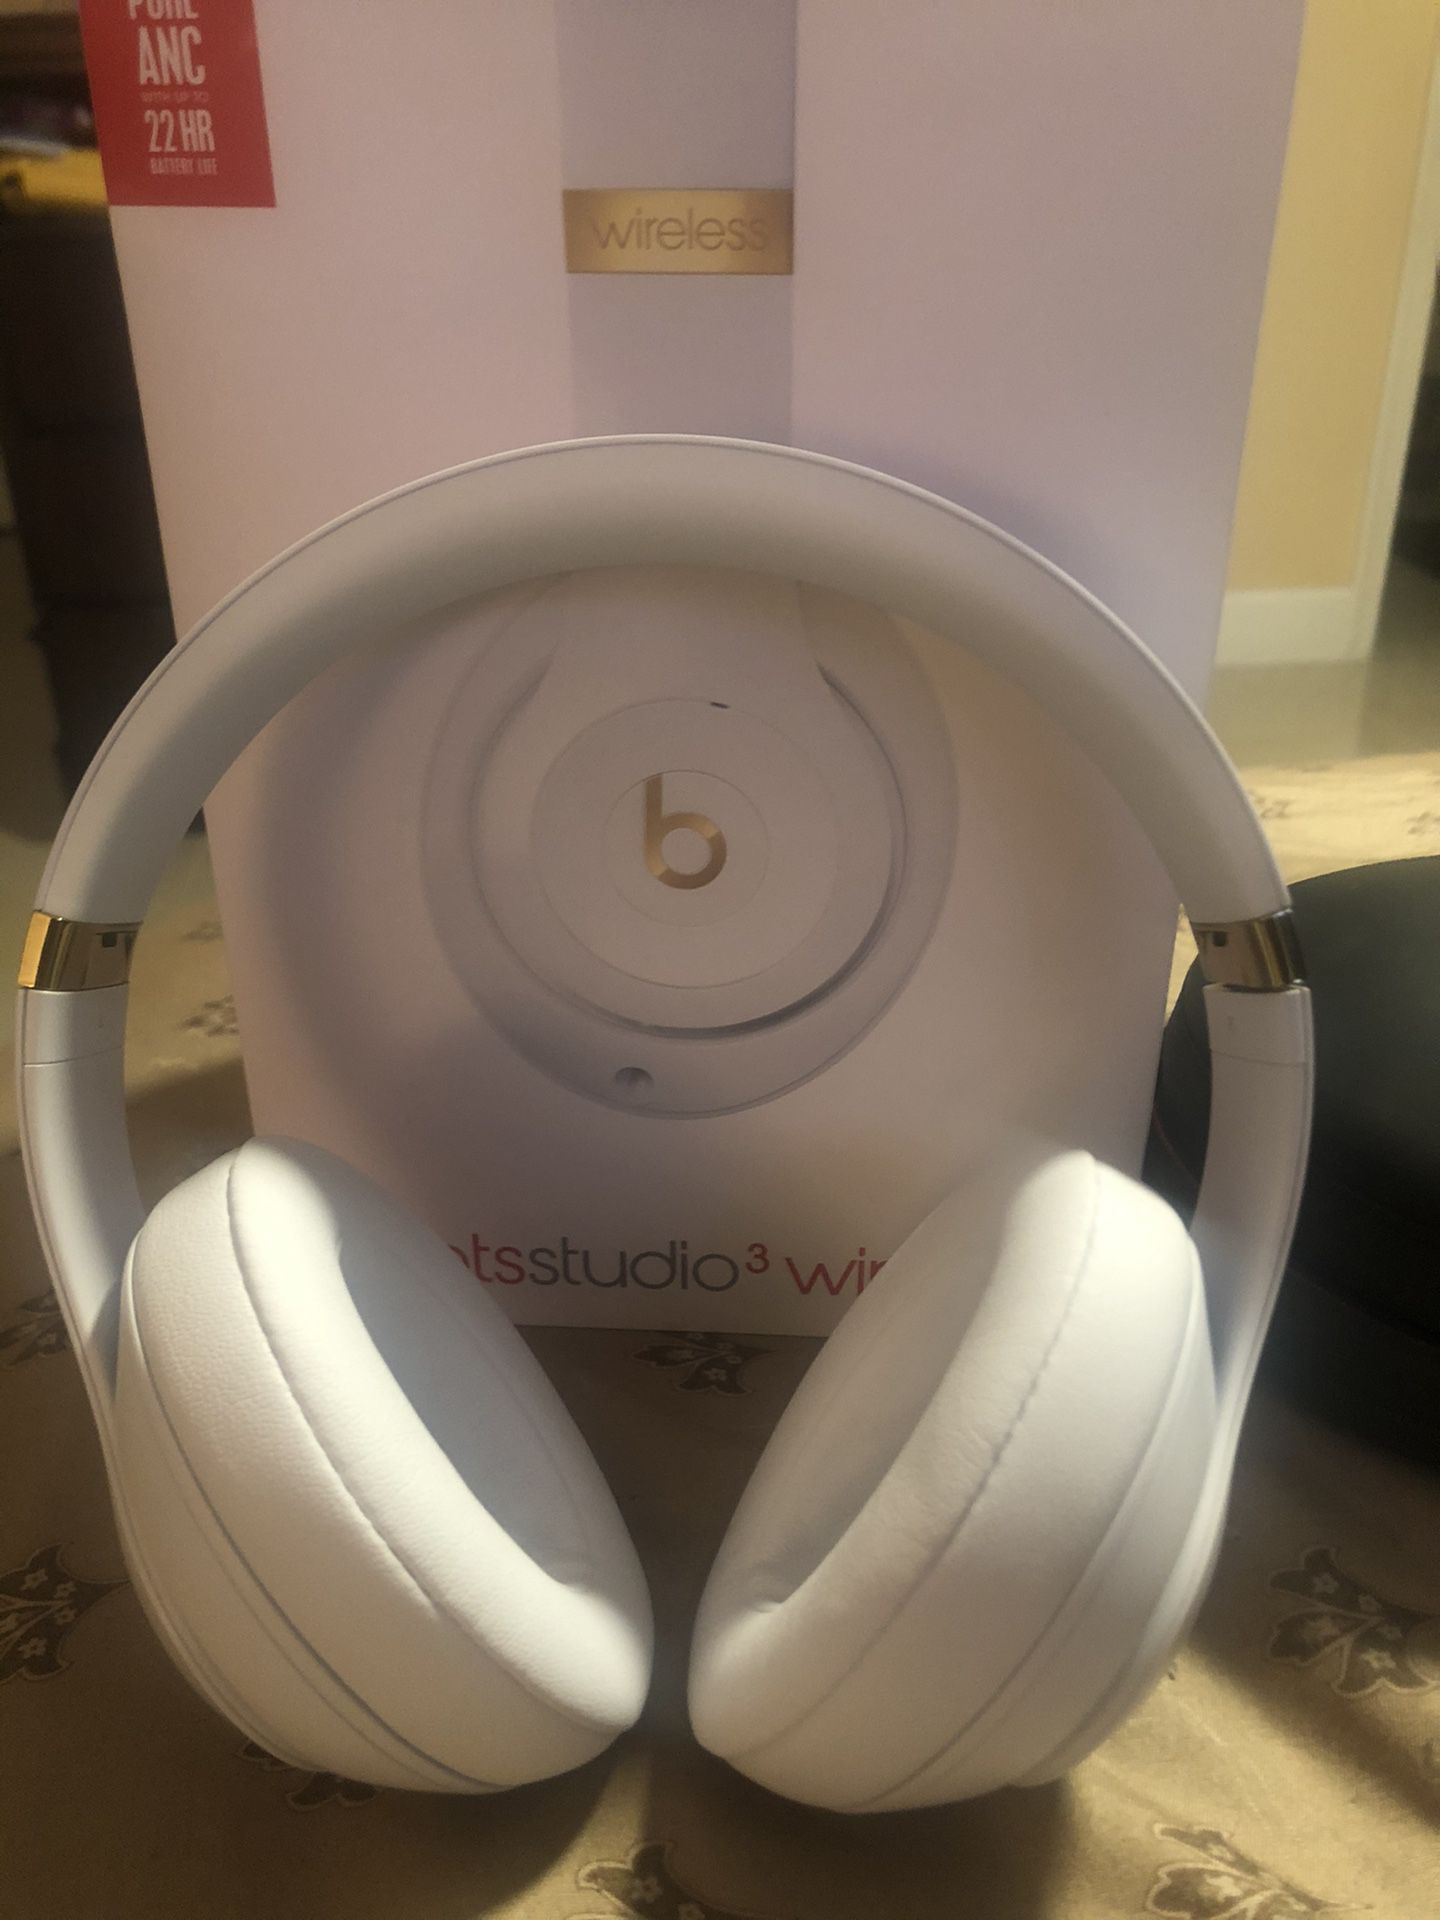 Fairly new beats by dr Dre studio3